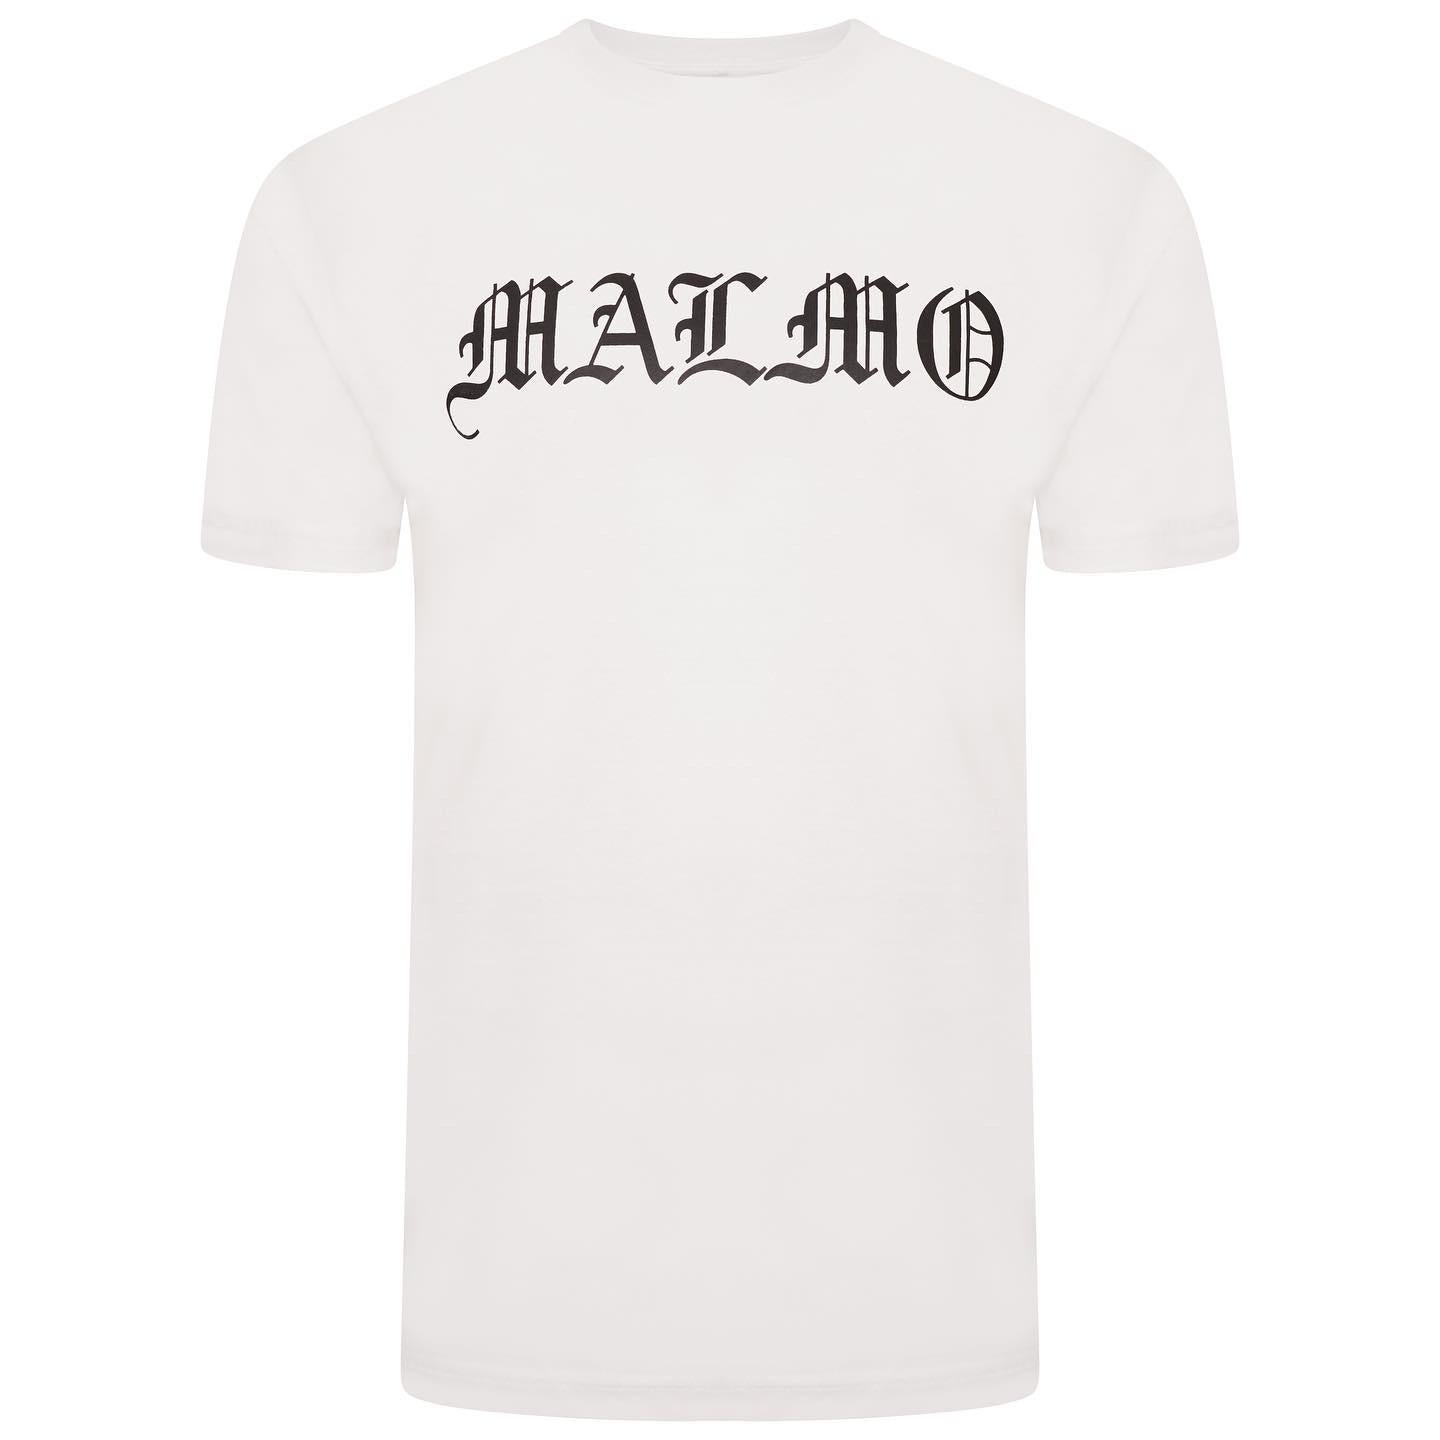 Malmo London Black T-shirt with White lettering in an Old English Style Font